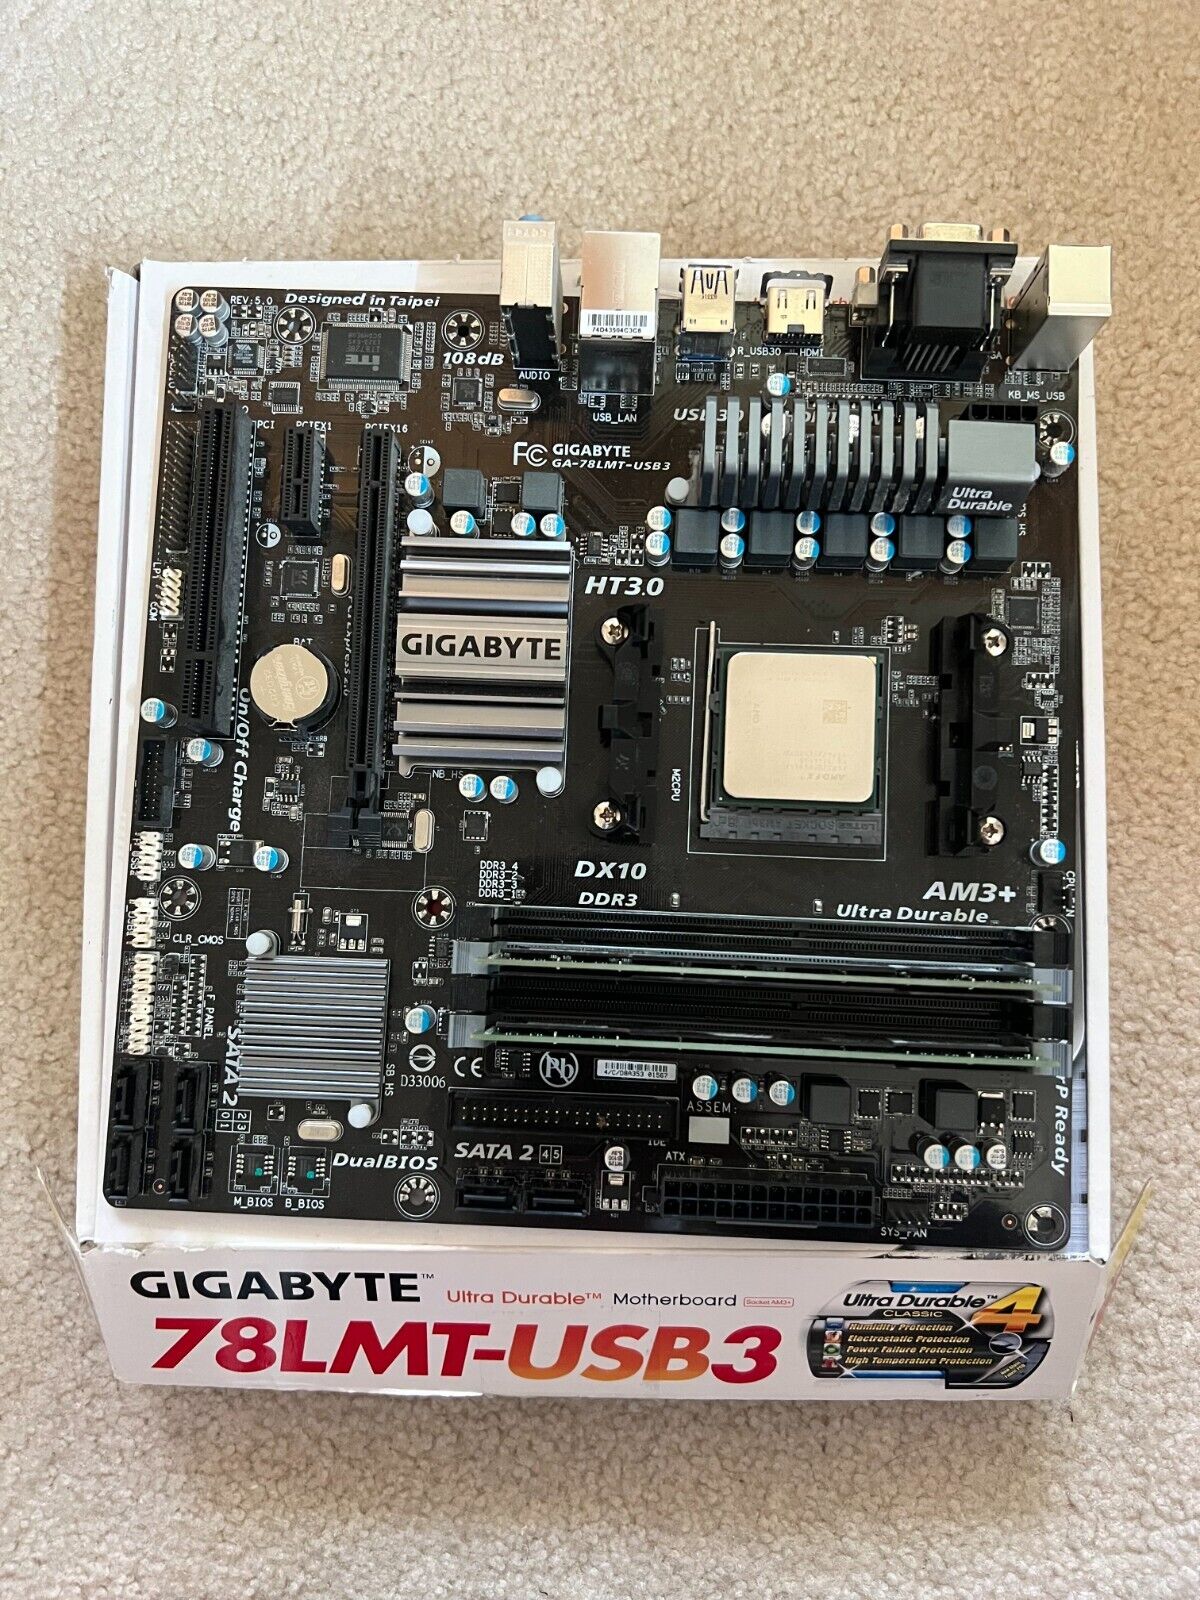 Gigabyte GA-78LMT-USB3 Motherboard with AMD FX-8320 8-core CPU and 16gb RAM 